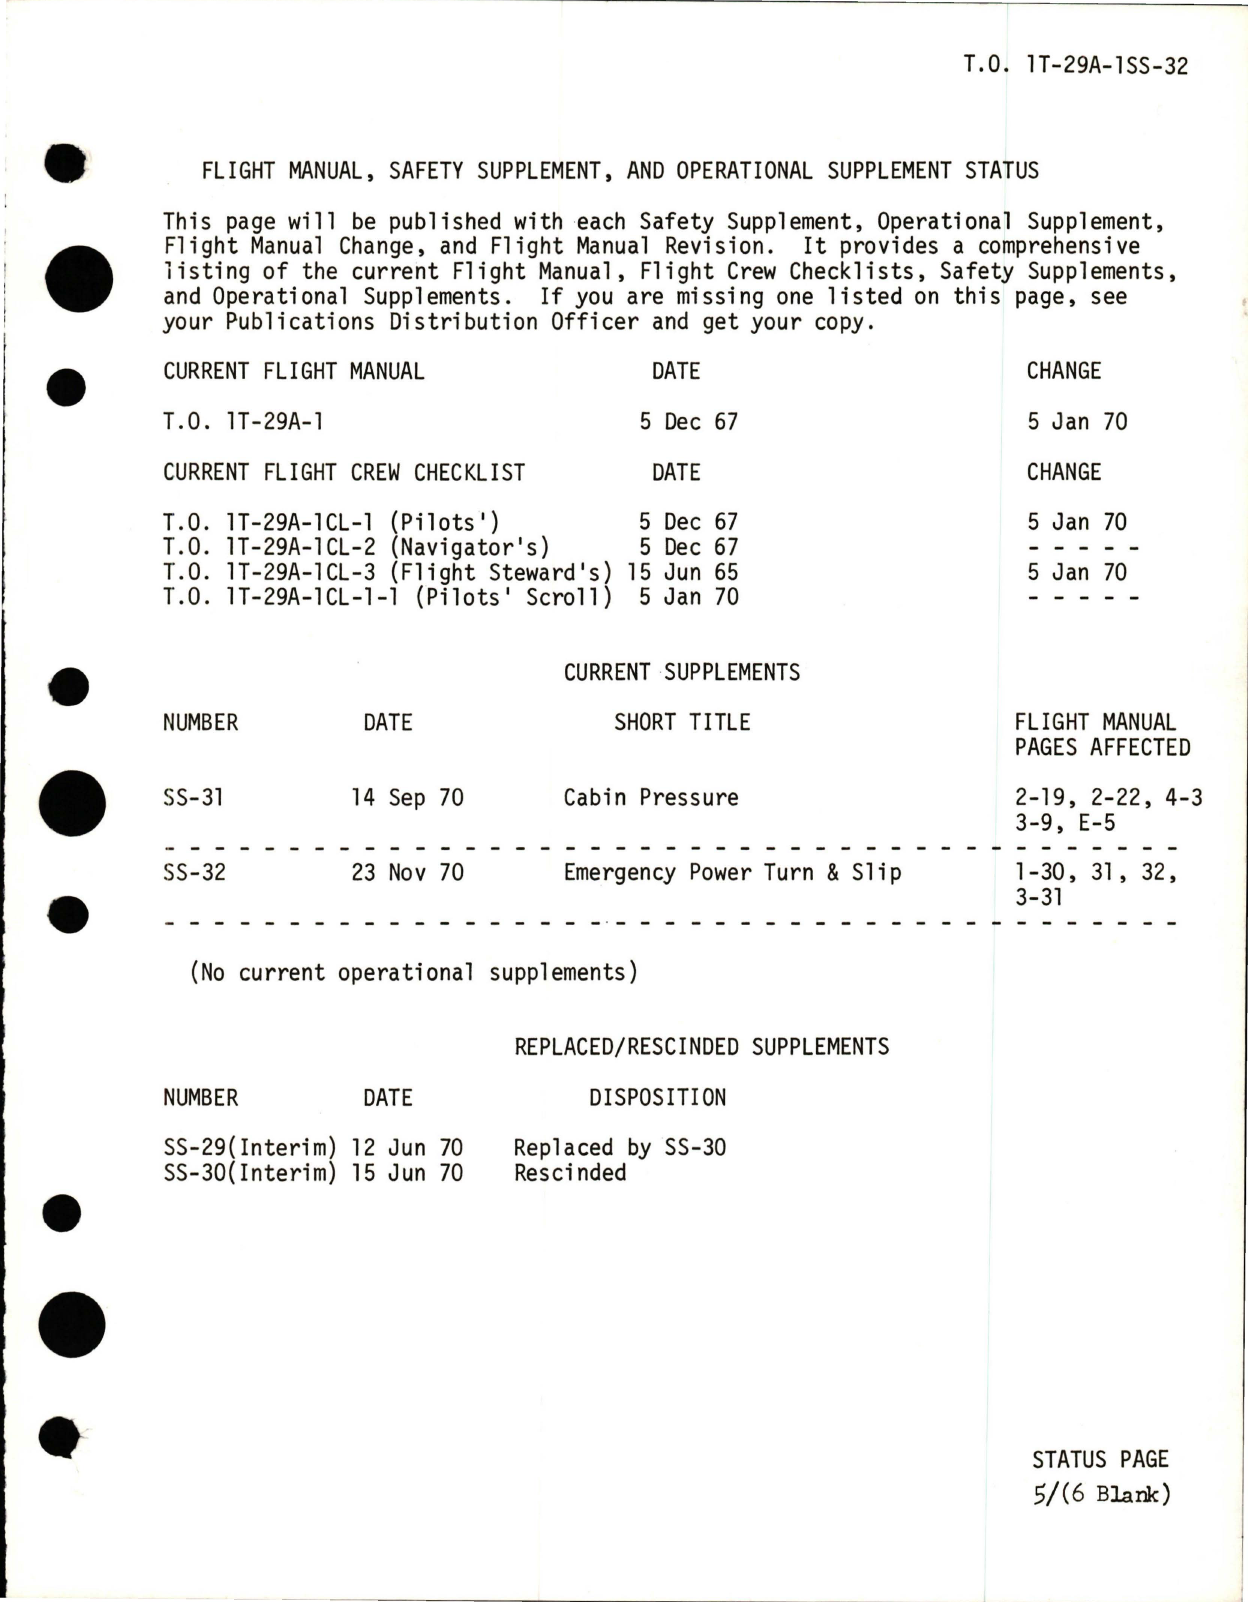 Sample page 5 from AirCorps Library document: Flight Manual for T-29A, T-29B, T-29C, T-29D